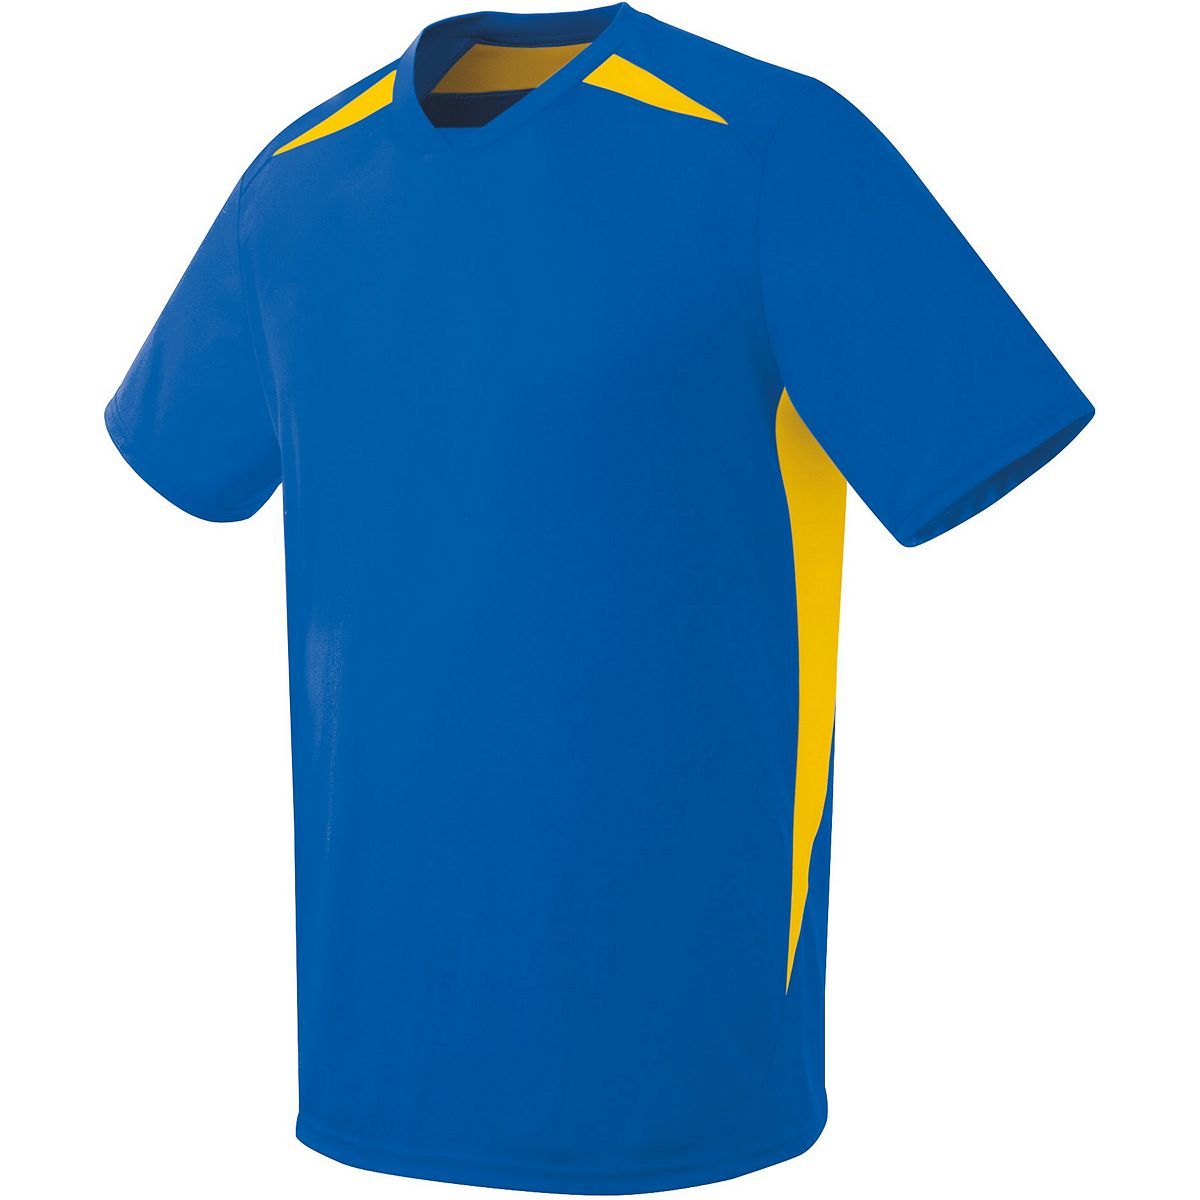 High 5 Youth Hawk Jersey in Royal/Athletic Gold  -Part of the Youth, Youth-Jersey, High5-Products, Soccer, Shirts, All-Sports-1 product lines at KanaleyCreations.com